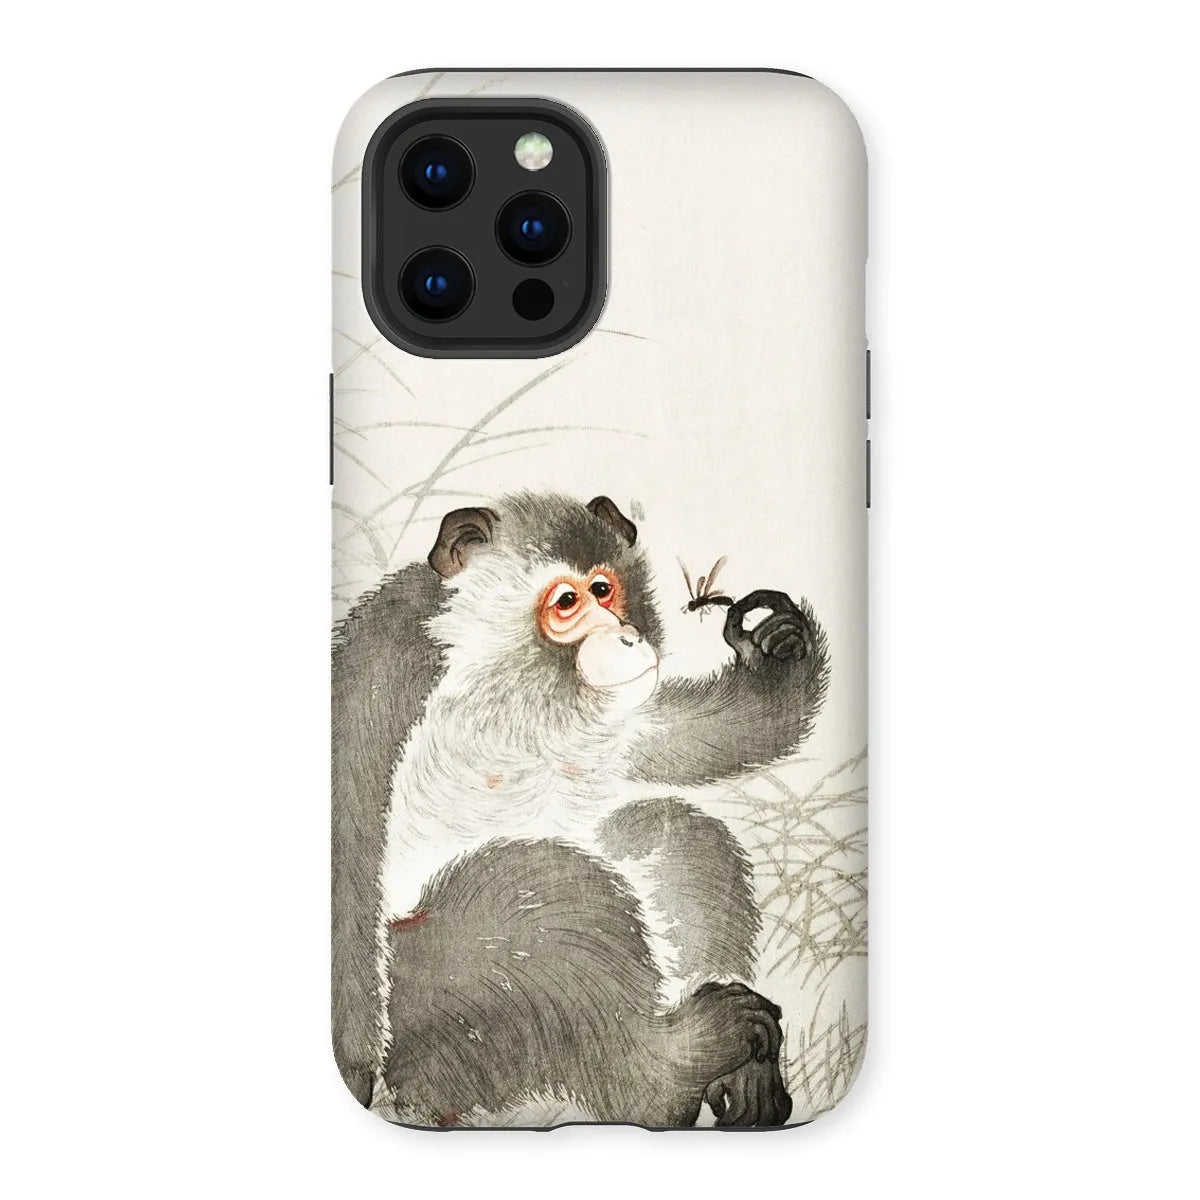 Monkey With Insect - Shin-hanga Art Phone Case - Ohara Koson - Iphone 12 Pro Max / Matte - Mobile Phone Cases